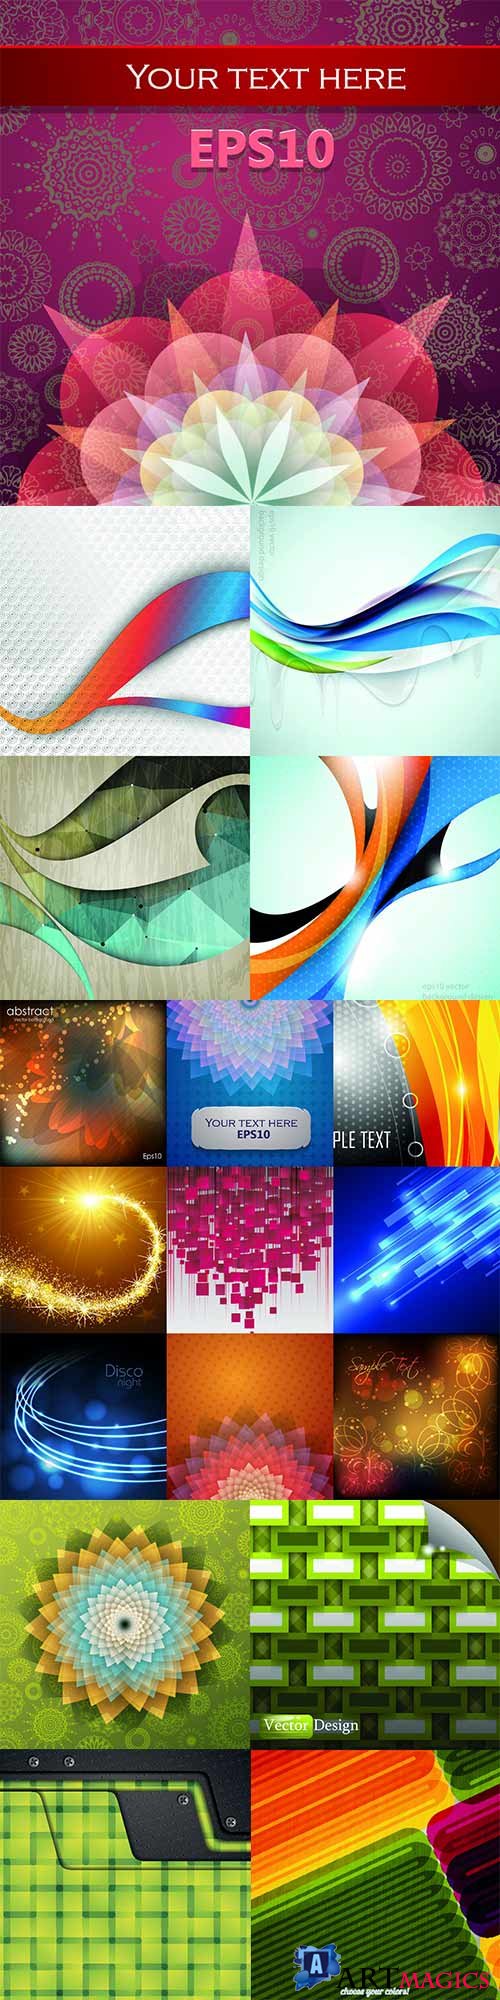 Bright colorful abstract backgrounds vector - 85